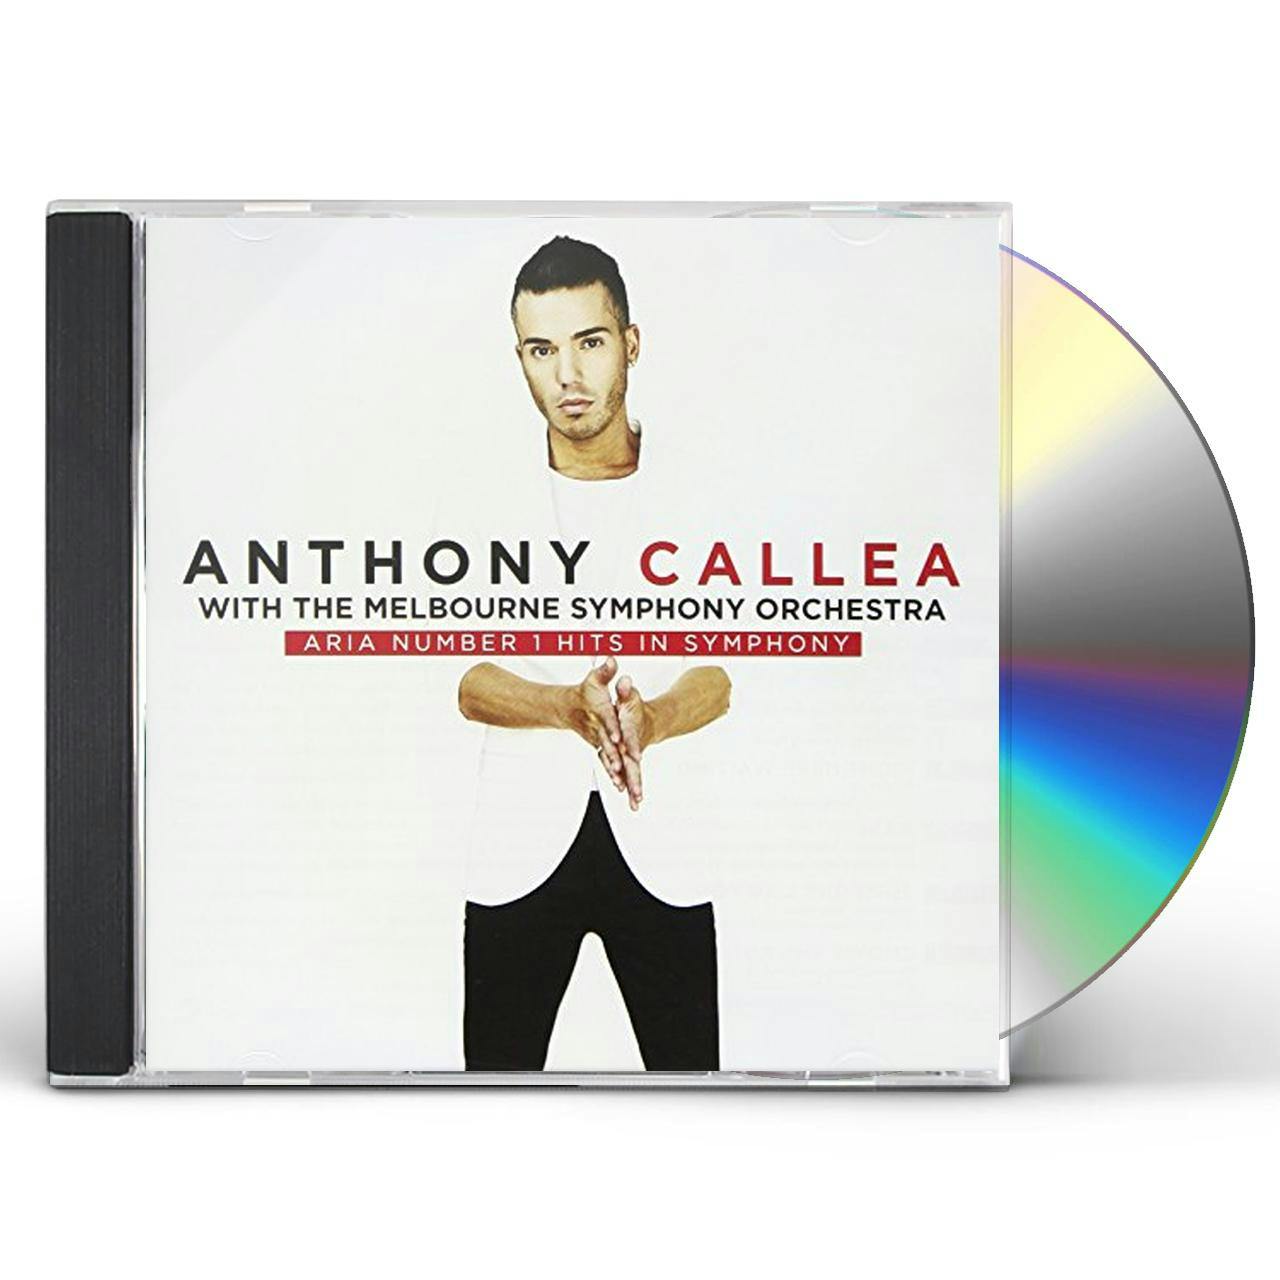 Anthony Callea ARIA NUMBER HITS IN SYMPHONY CD